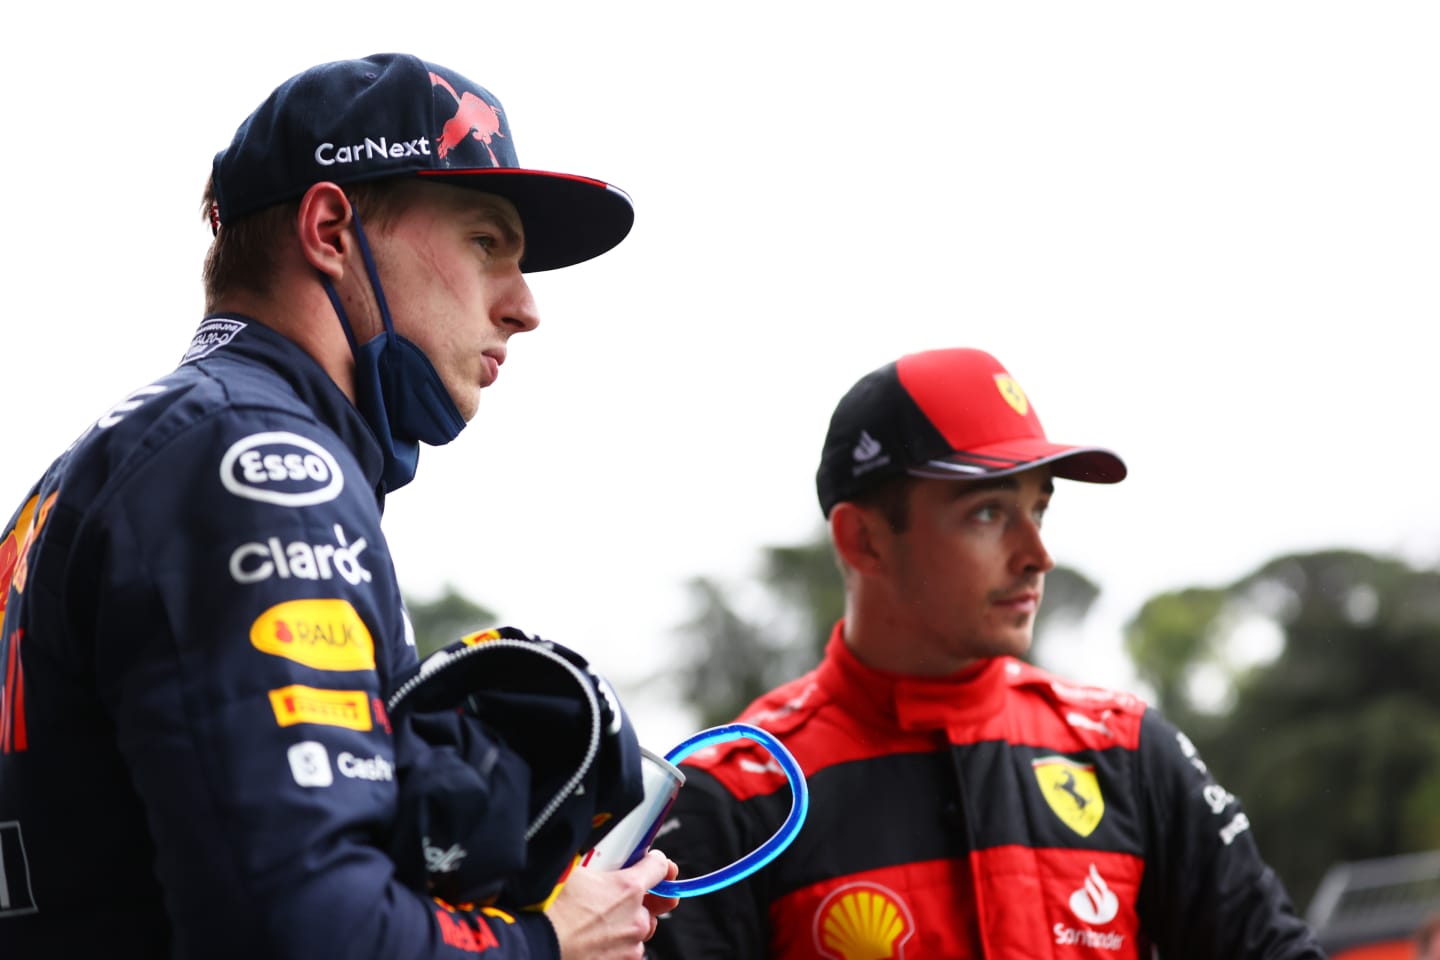 IMOLA, ITALY - APRIL 22: Pole position qualifier Max Verstappen of the Netherlands and Oracle Red